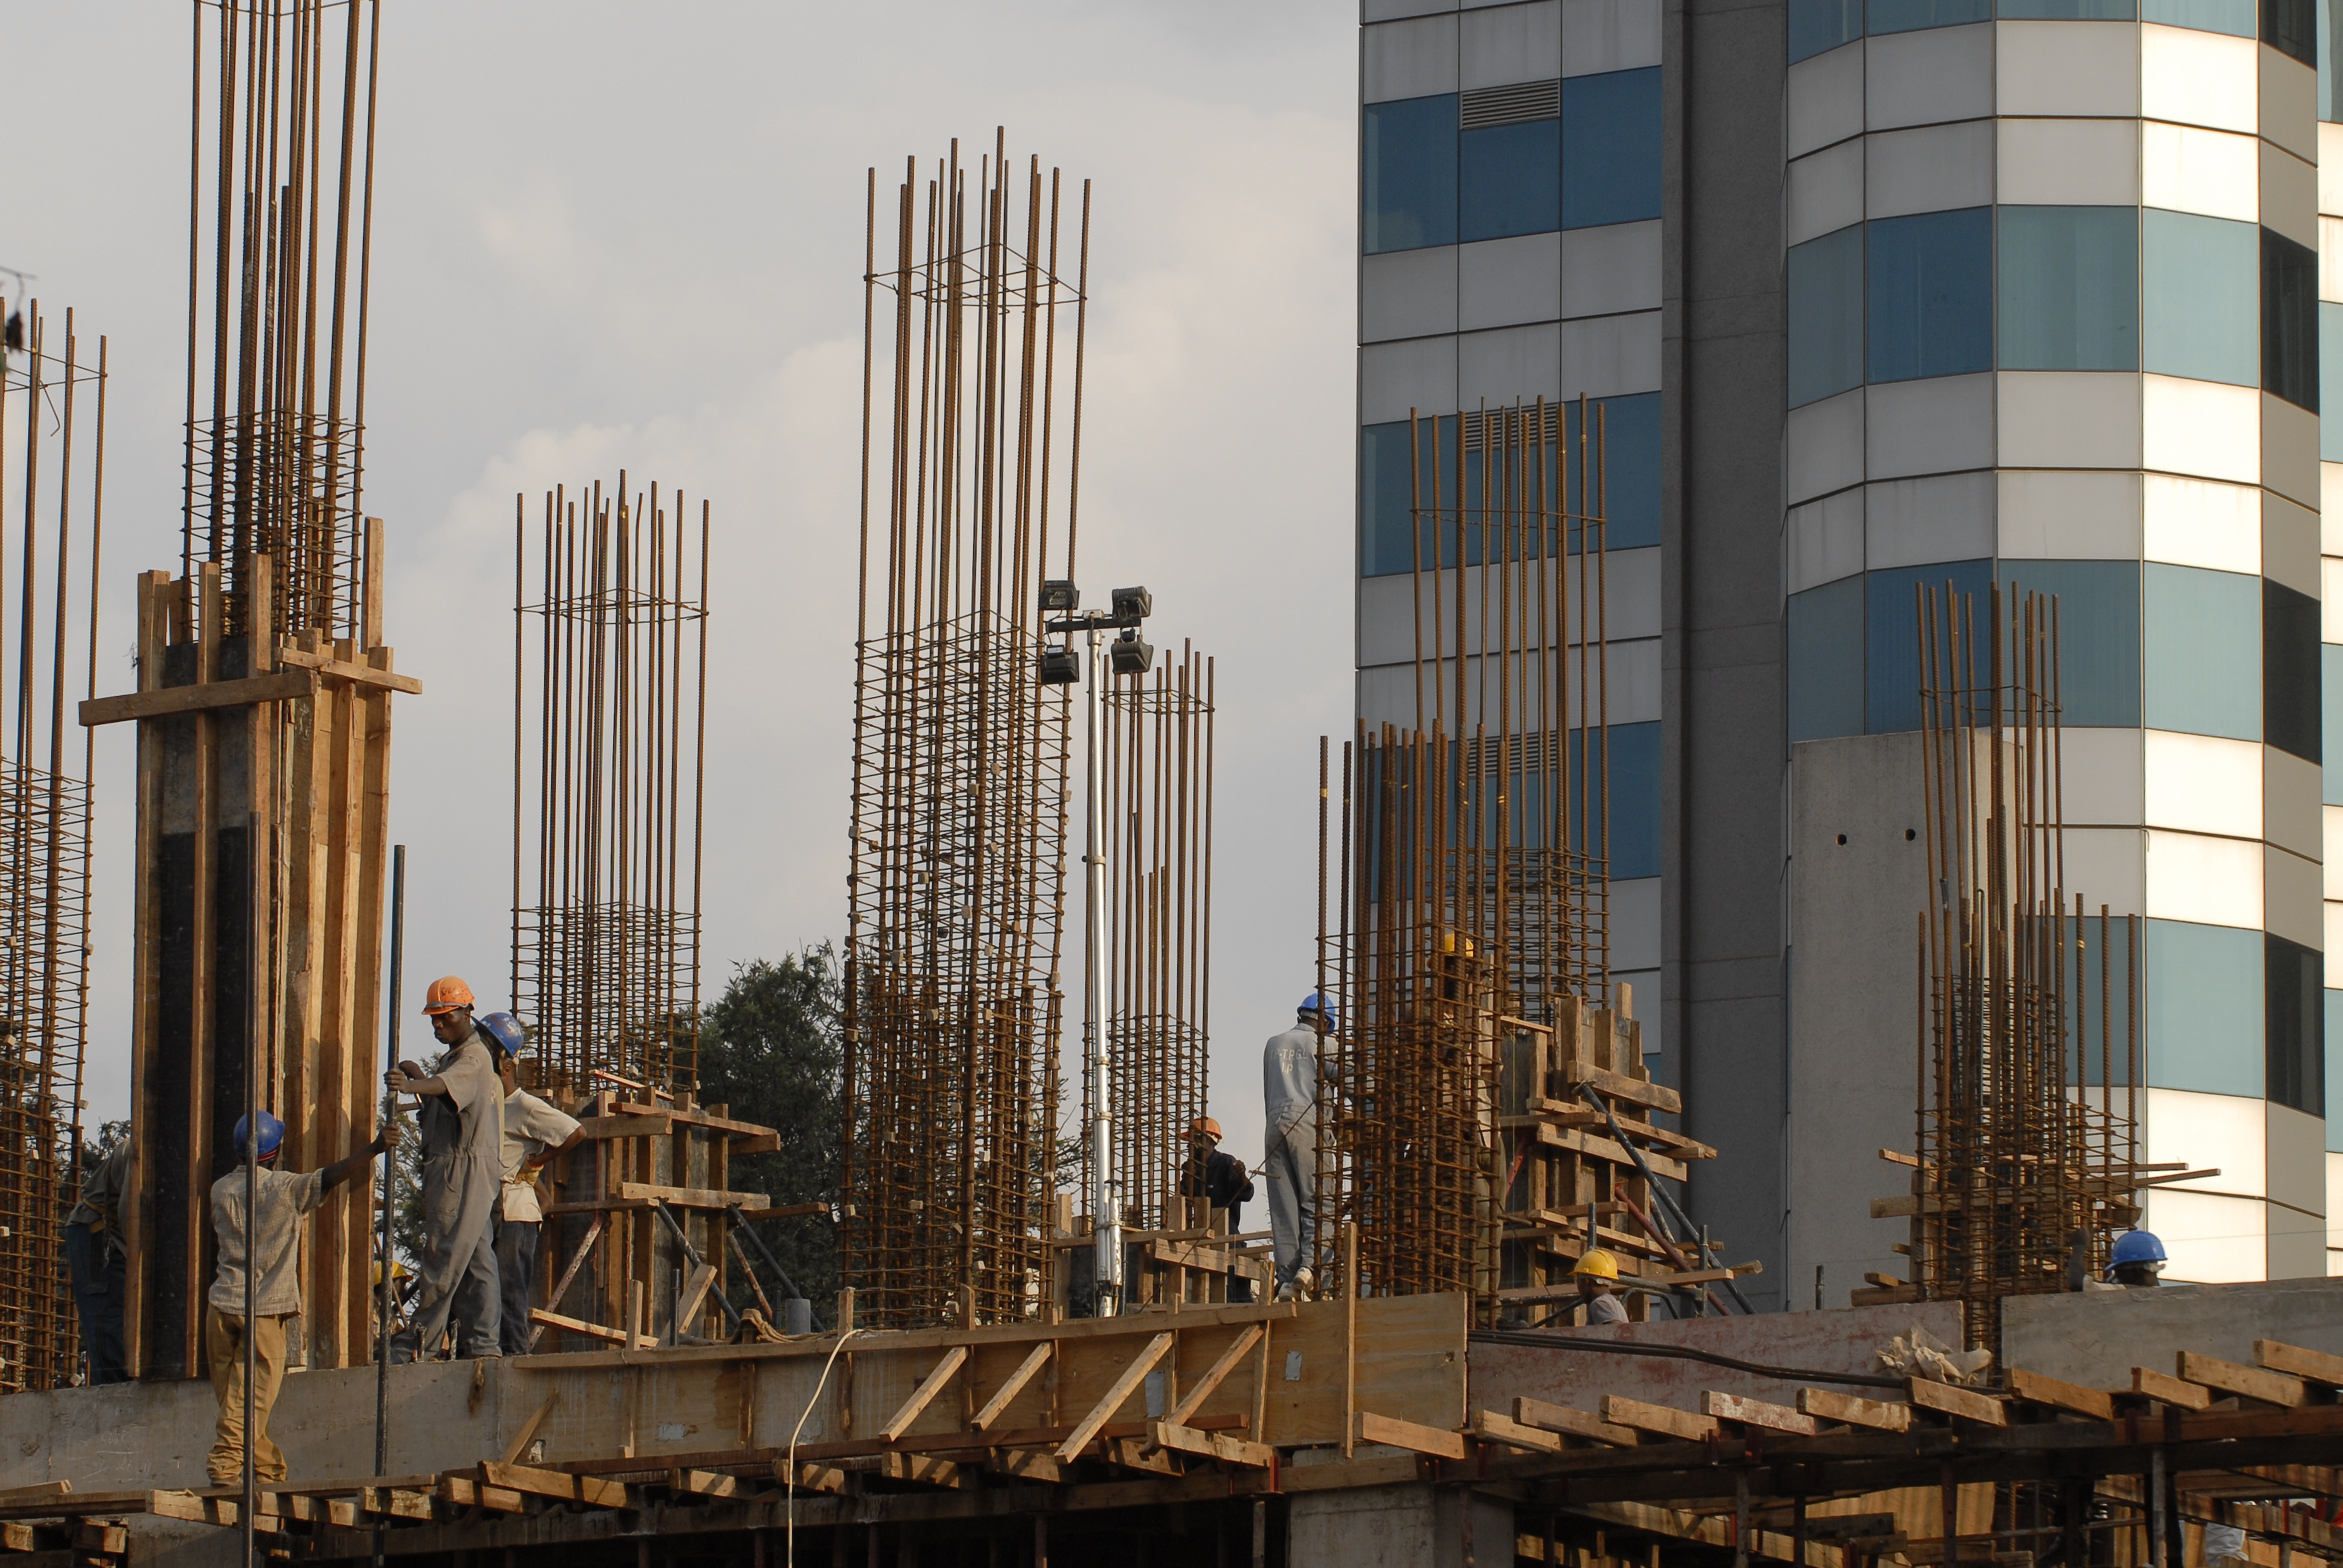 The economy is growing fast: construction site in Kigali in 2008.